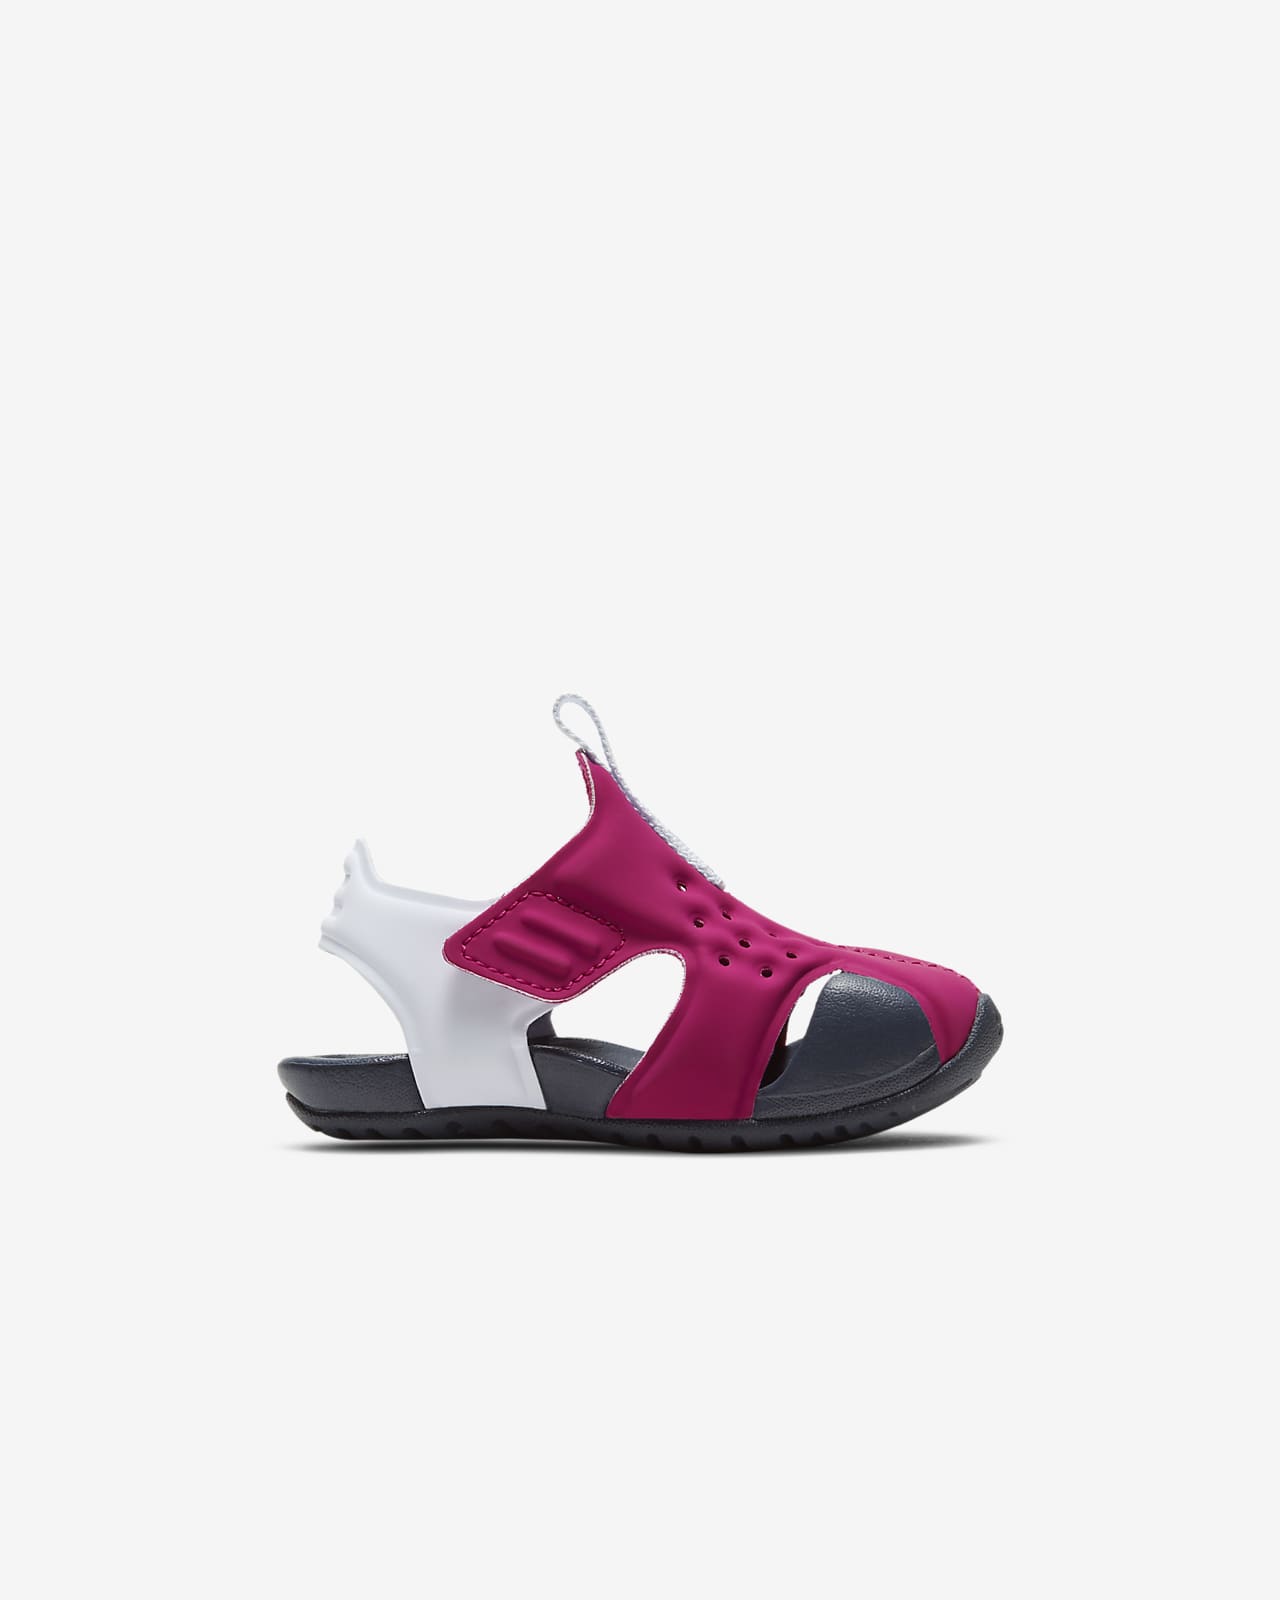 nike protect 2 sandals